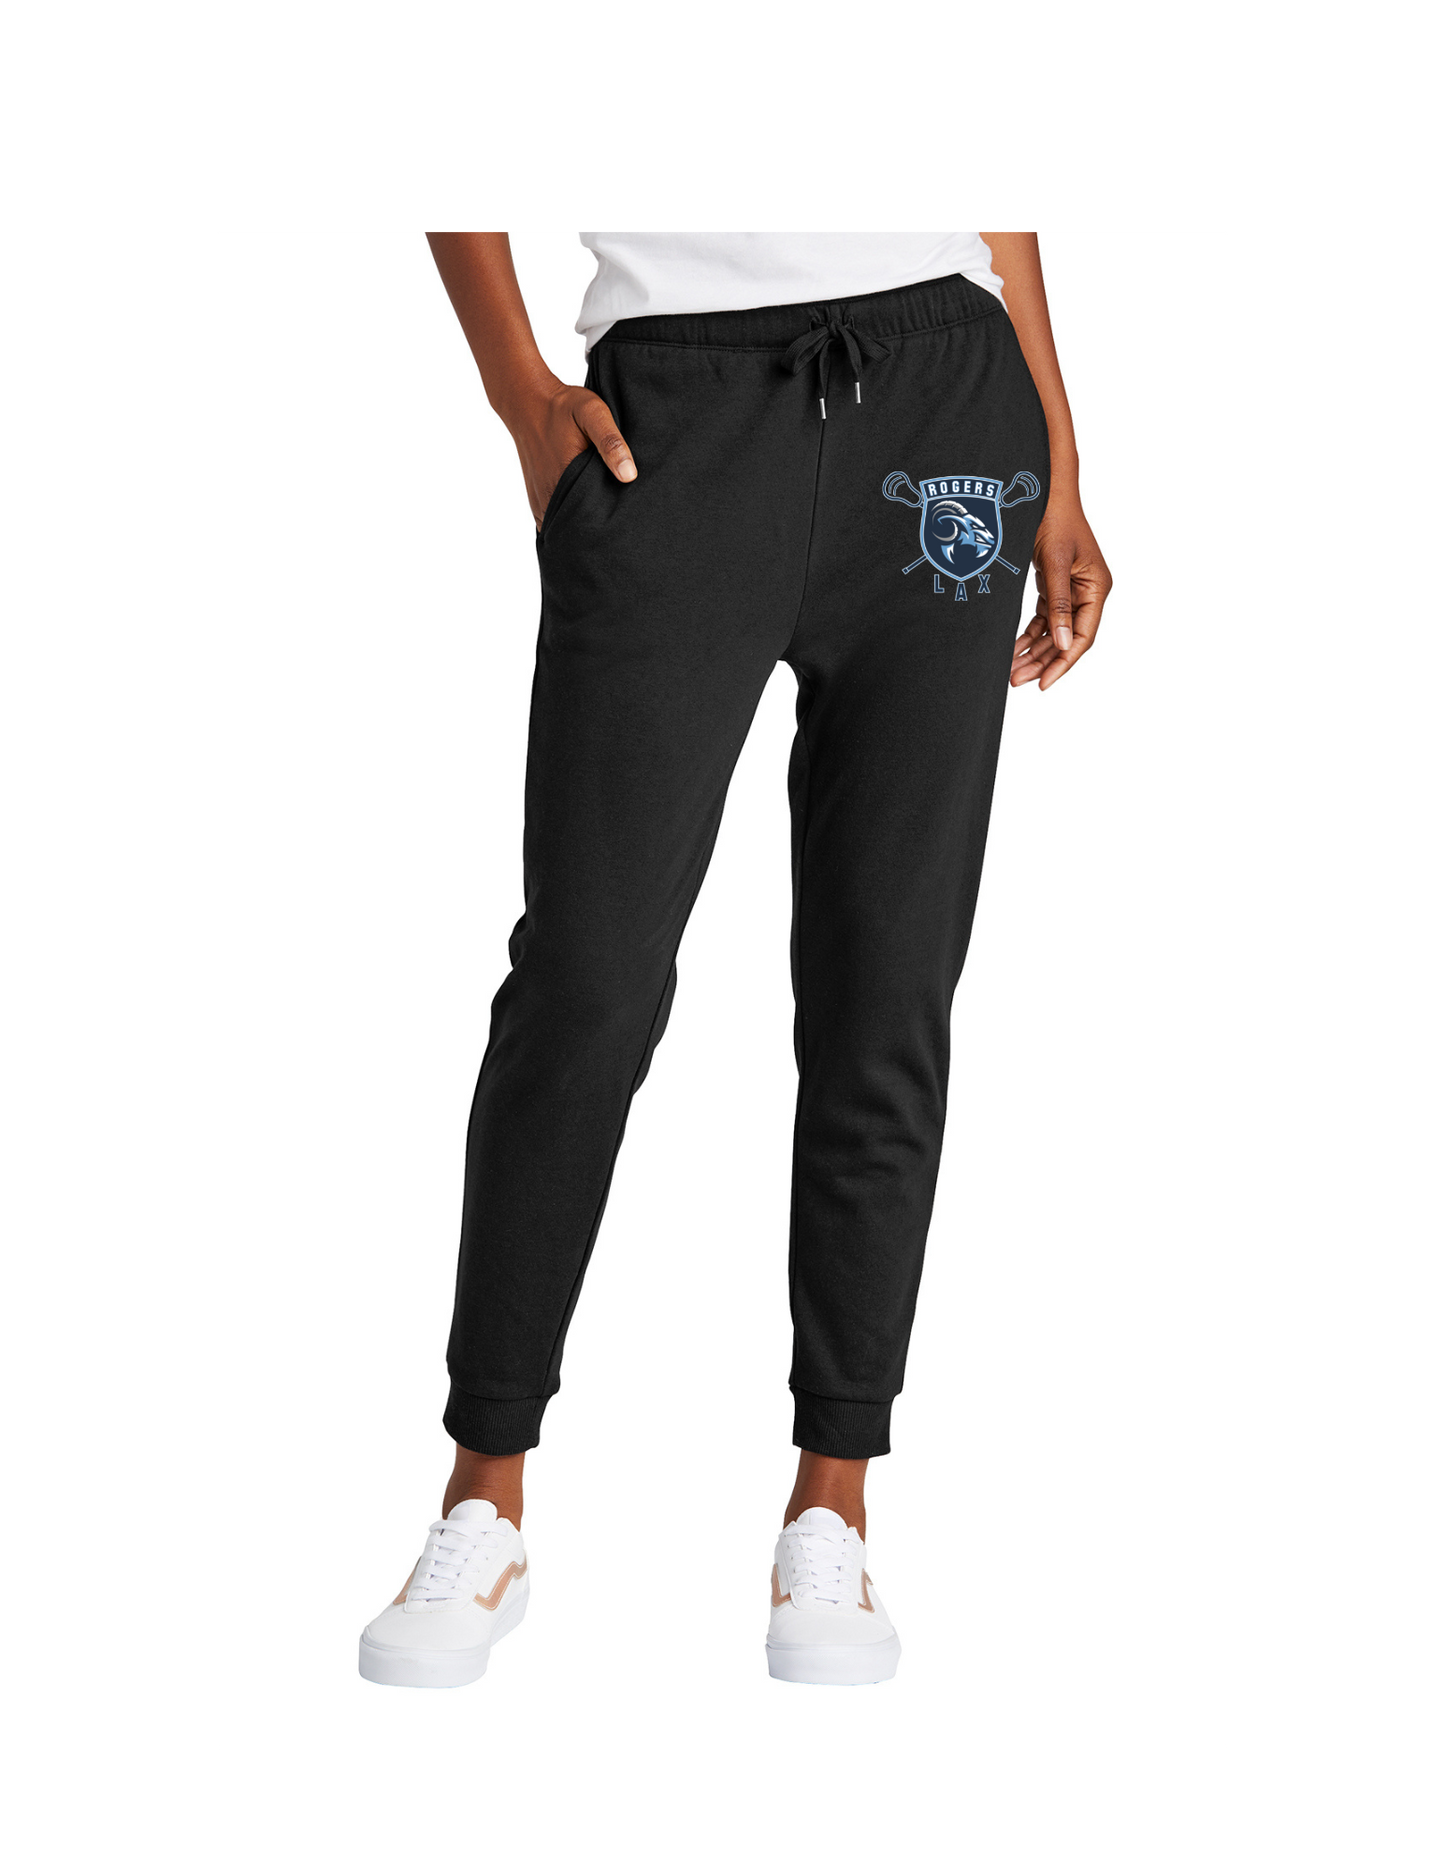 Rogers Women's Tri-Fleece Jogger (click for additional options)